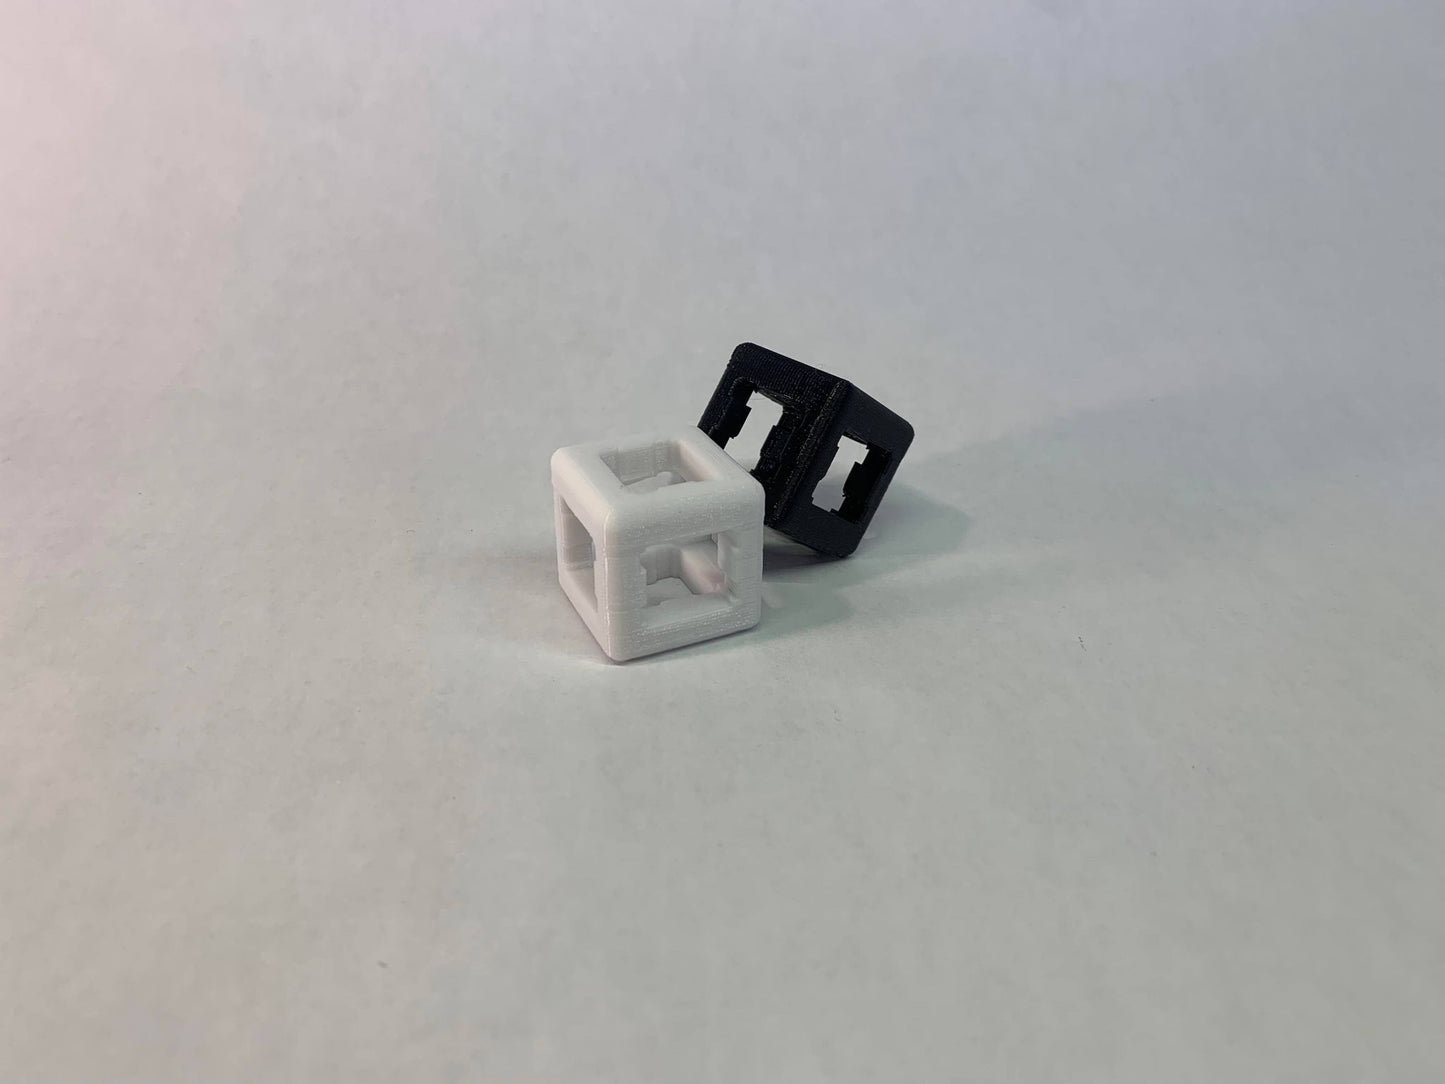 Mechanical Switch Fidgit Toy | KIT | SenacLLC | 6 key switches Custom Switches Cube, No Switches Included